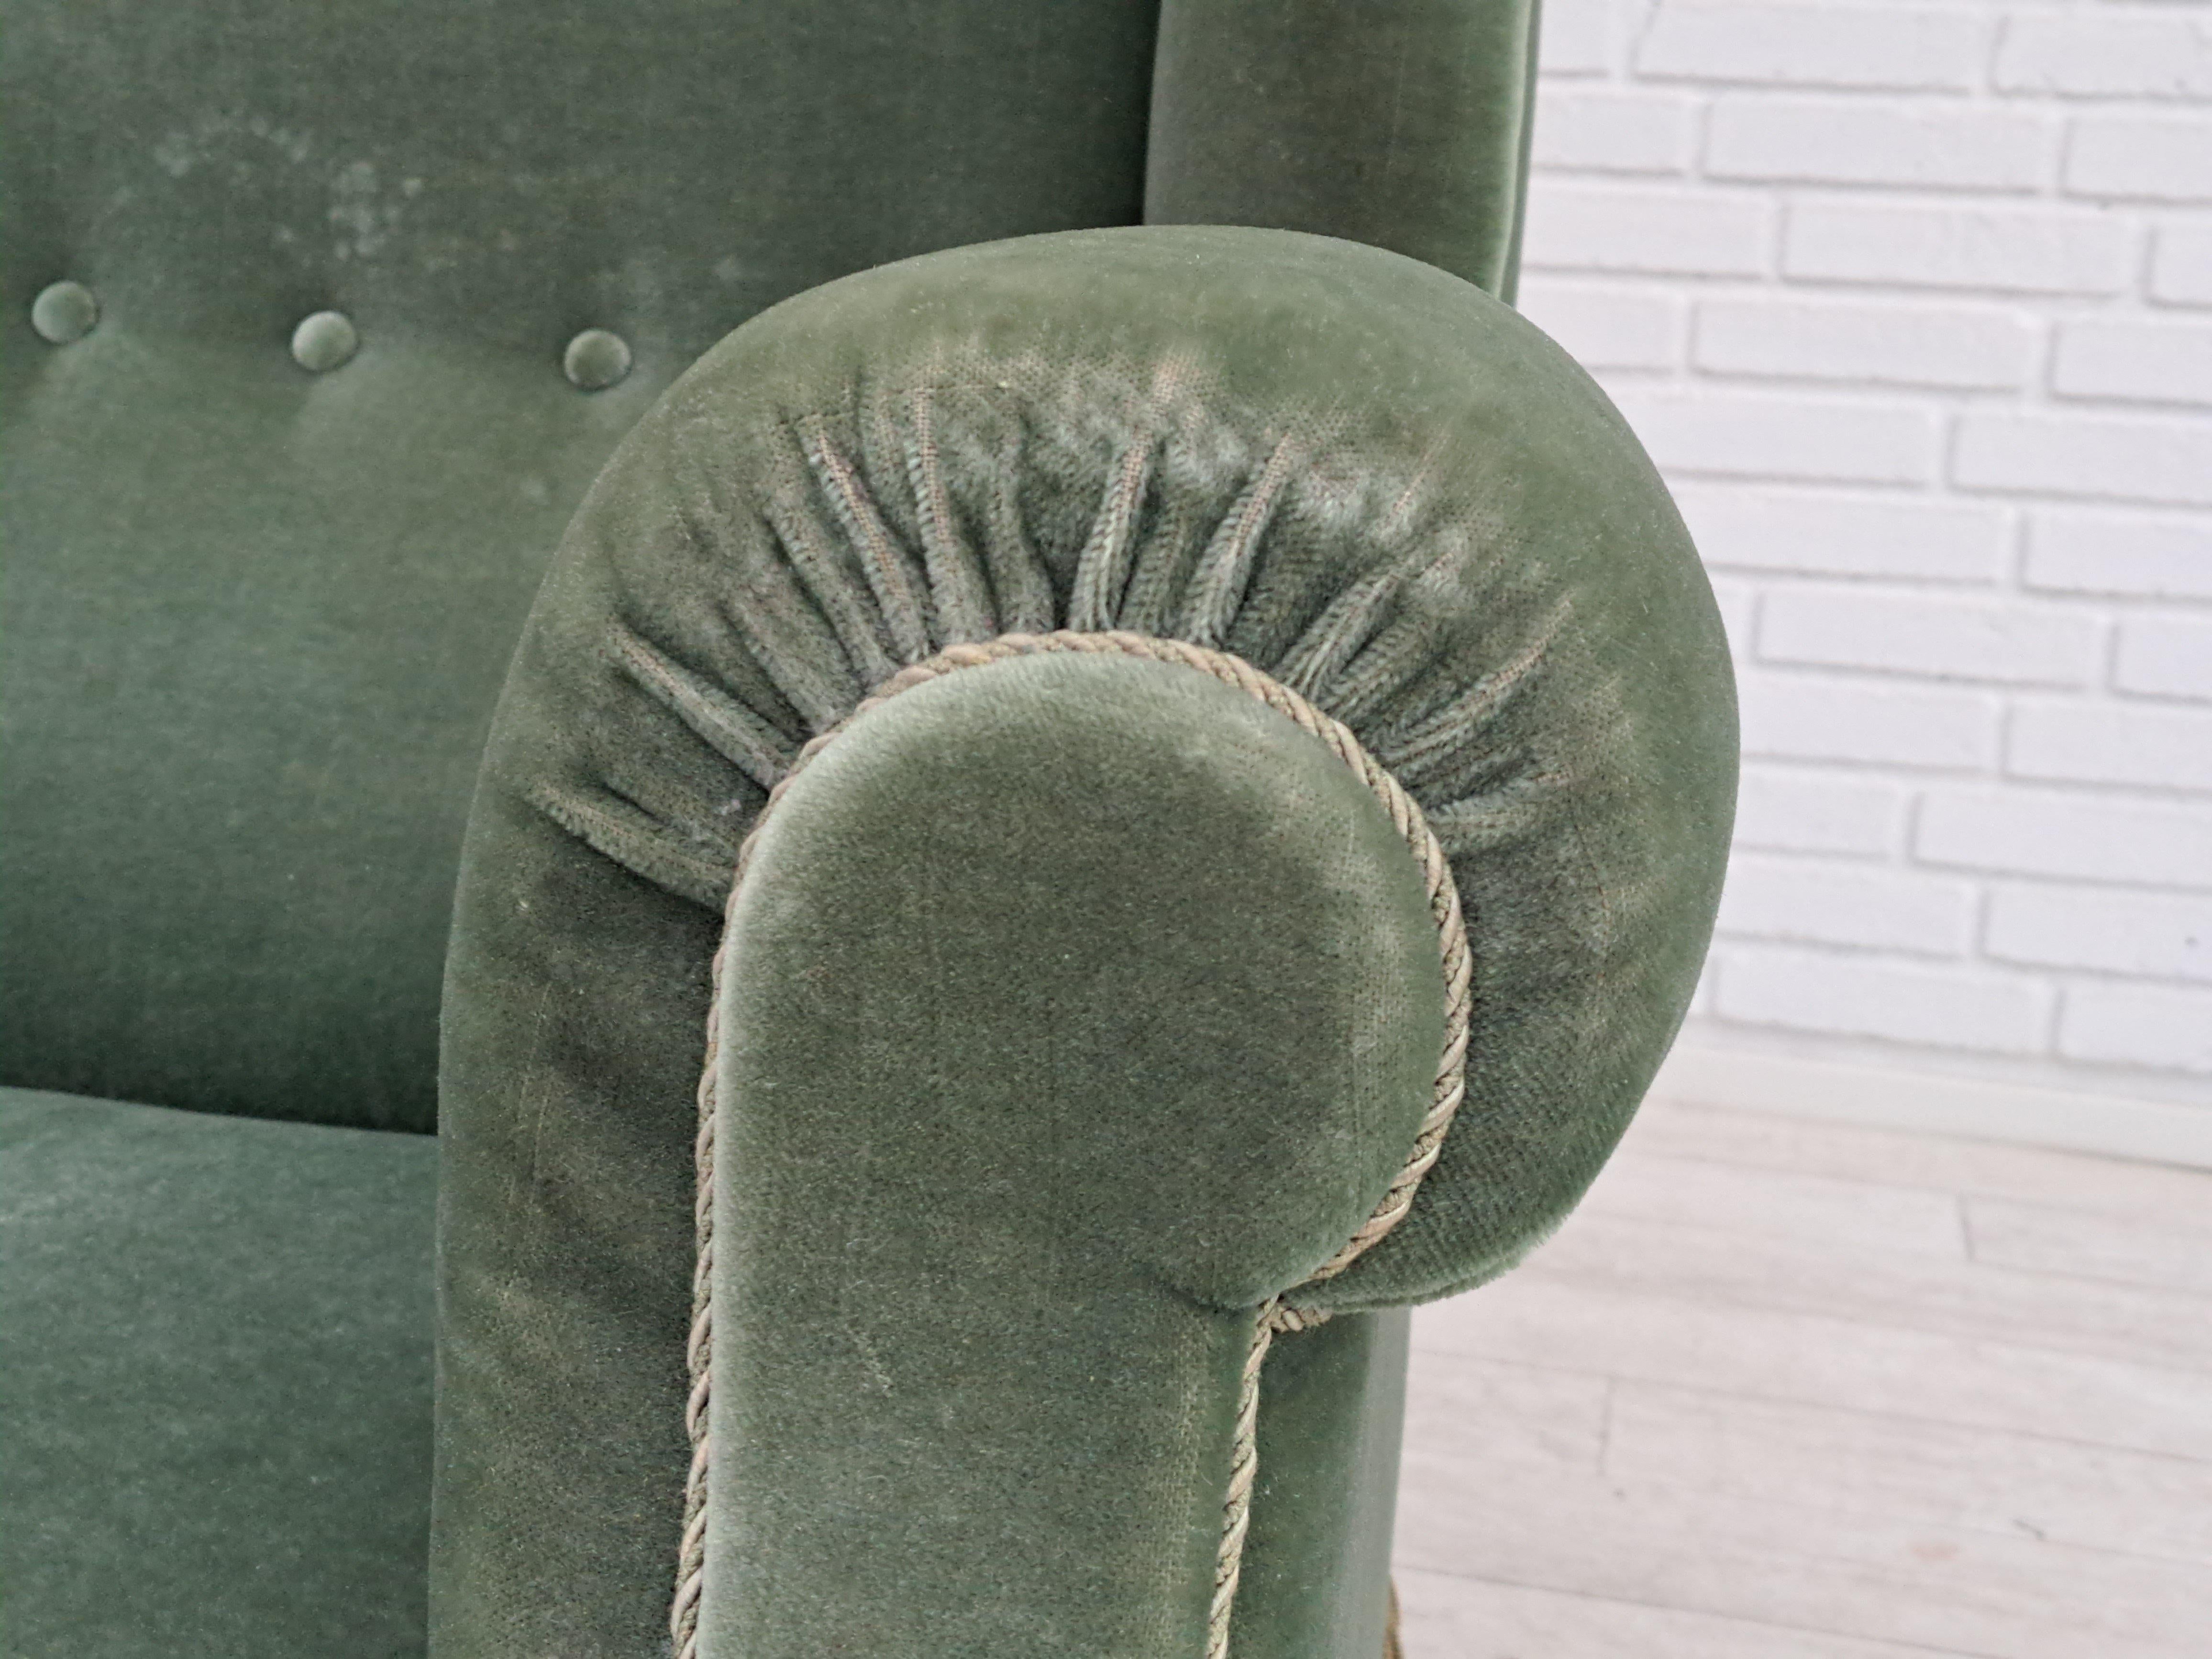 1960s, Danish design by Fritz Hansen. Relax lounge chair, original very good condition, no smells. Light green velour. Oak wood legs, brass springs in the seat. Very comfortable. Made in about 1960 by Danish furniture manufacturer Fritz Hansen.